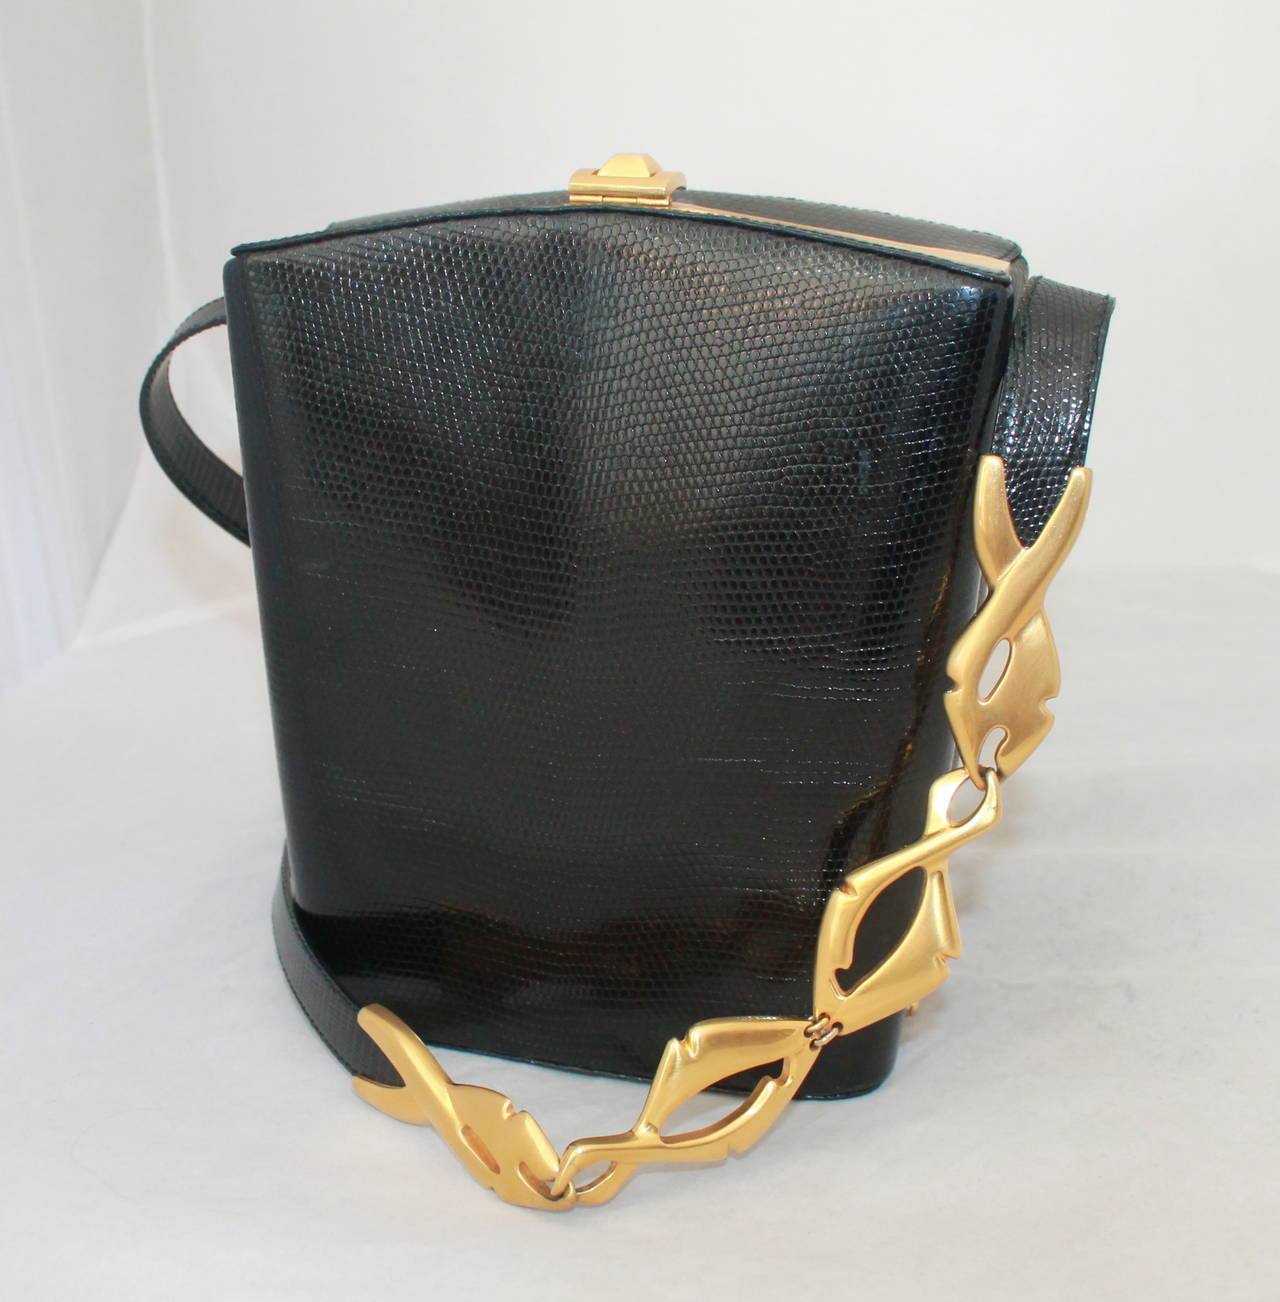 Gucci 1980's Black Lizard & Gold Chain Crossbody Bag. This bag is in excellent vintage condition with very minimal wear. It has a suede lining and  two compartments. 

Measurements:
Length- 8.5